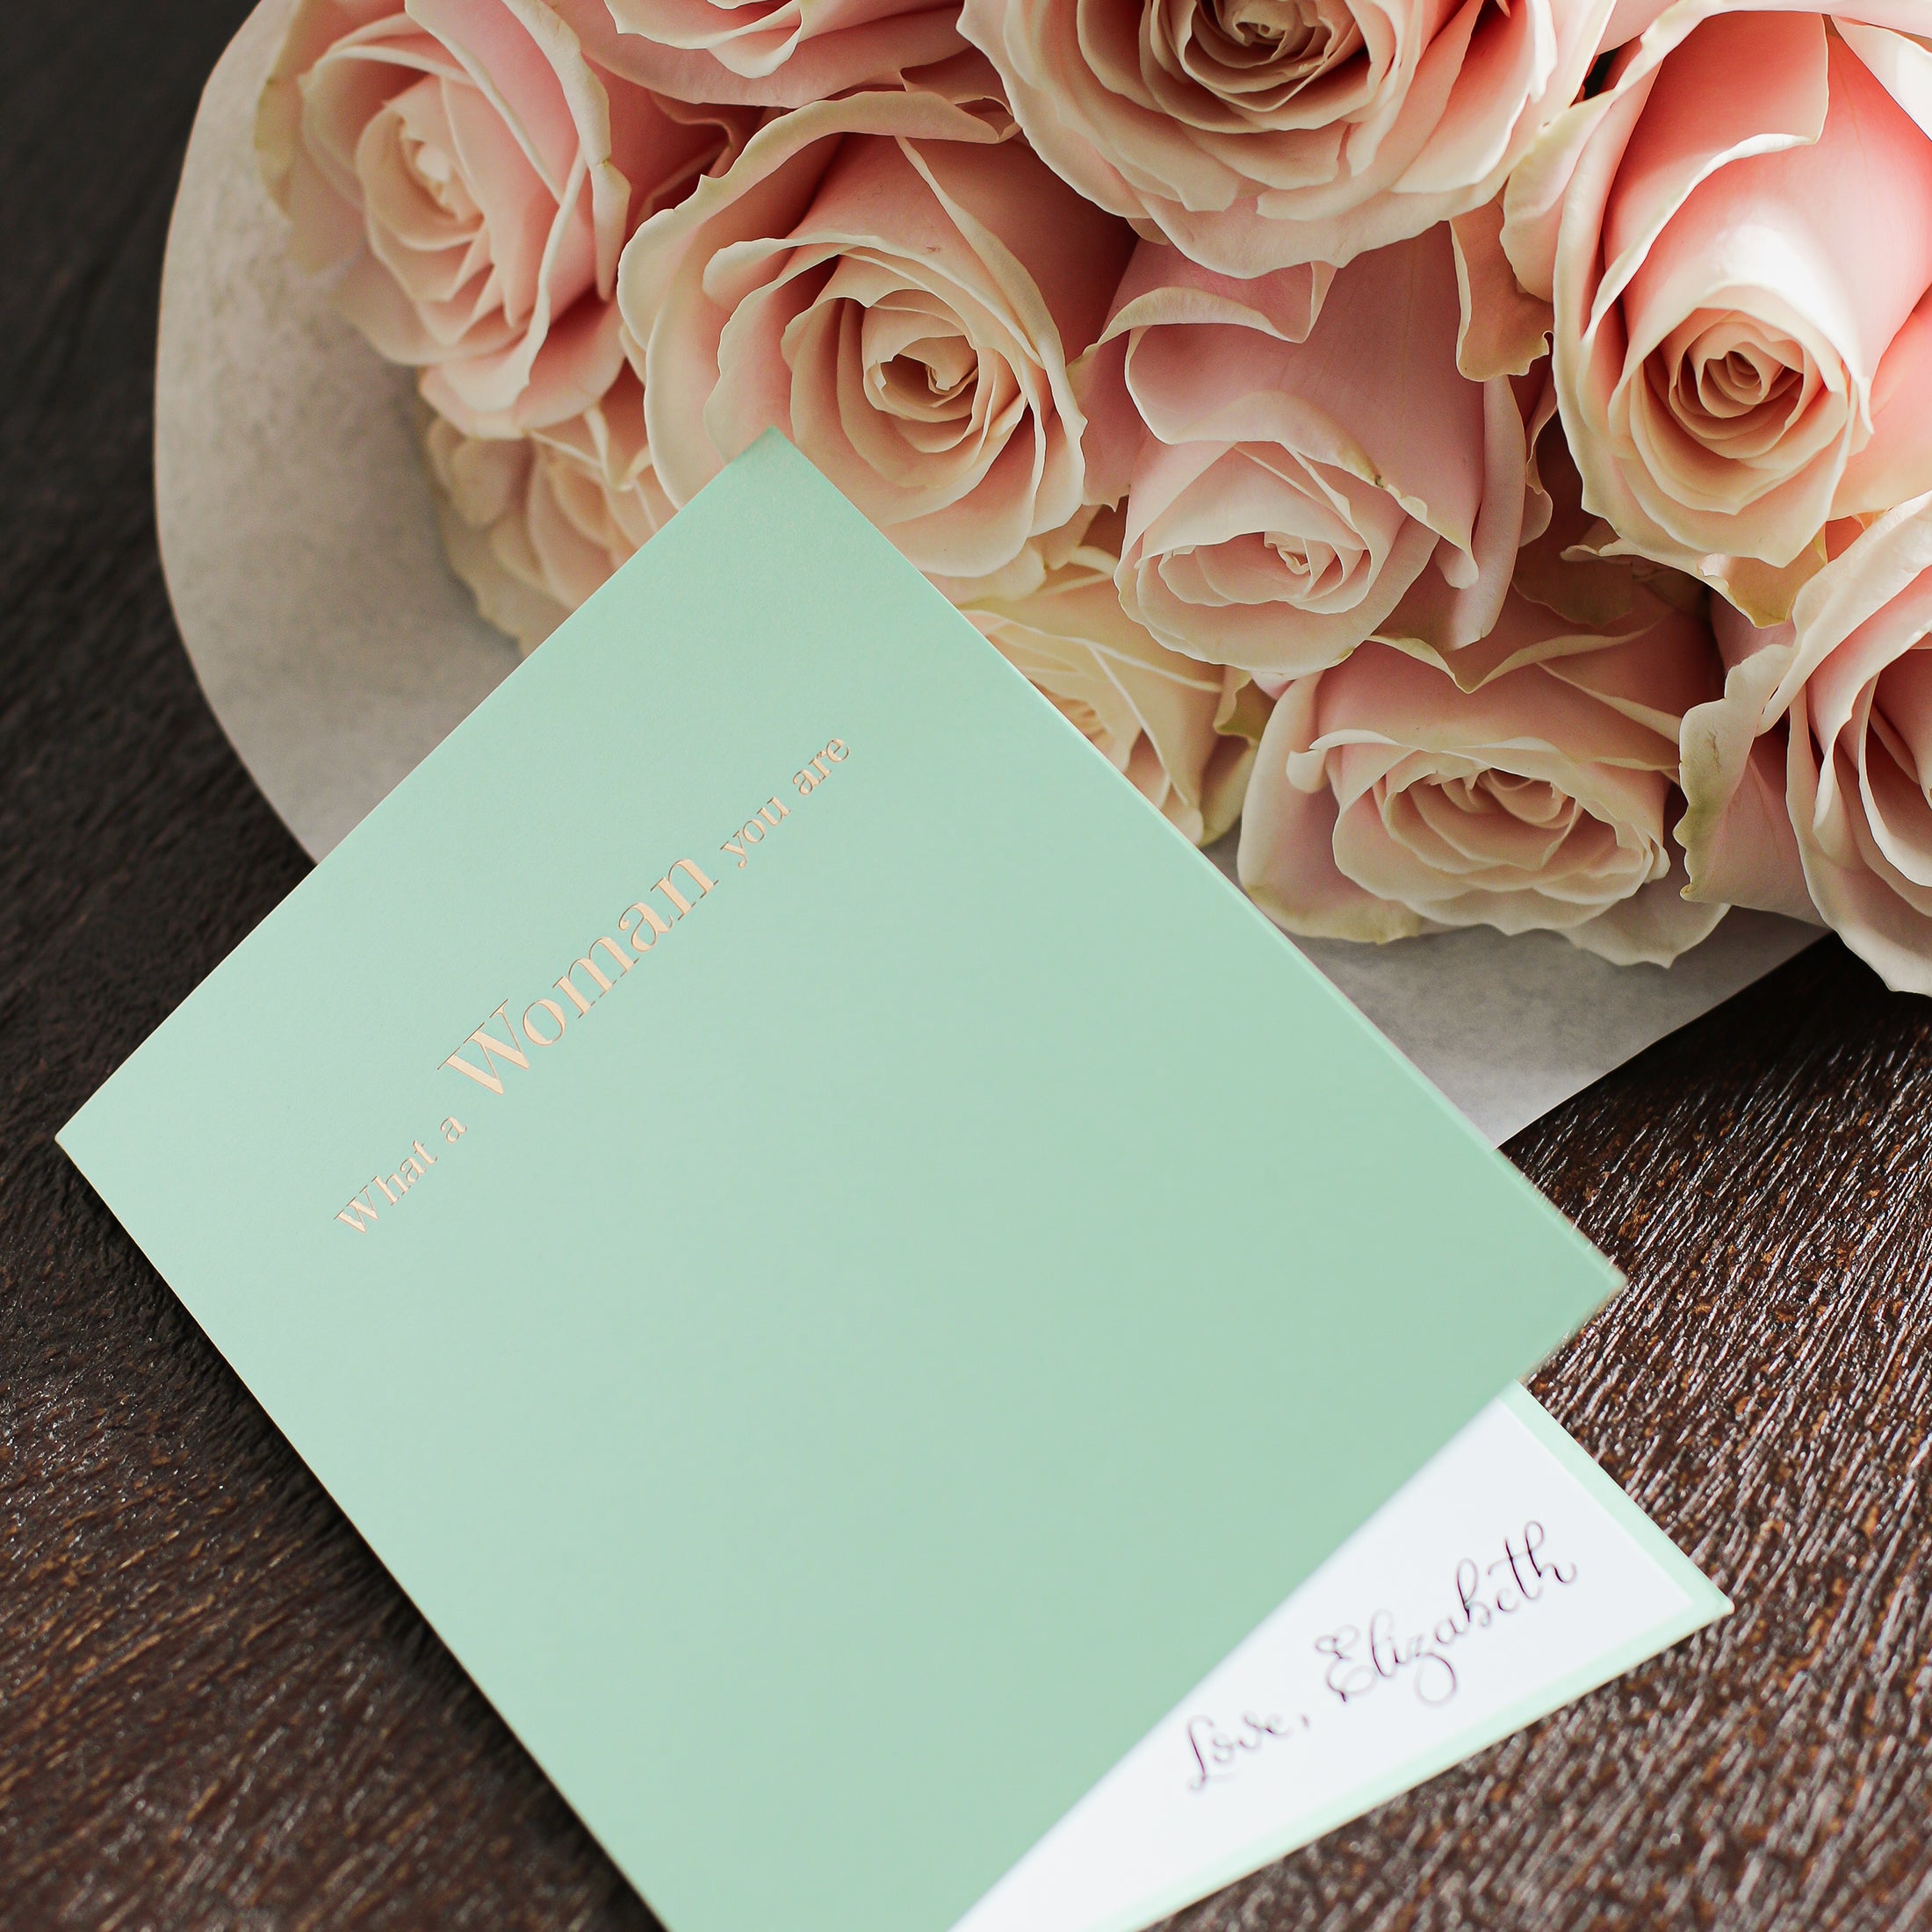 10 Cards To Gift A Mother Figure On Mother’s Day - Story of Elegance